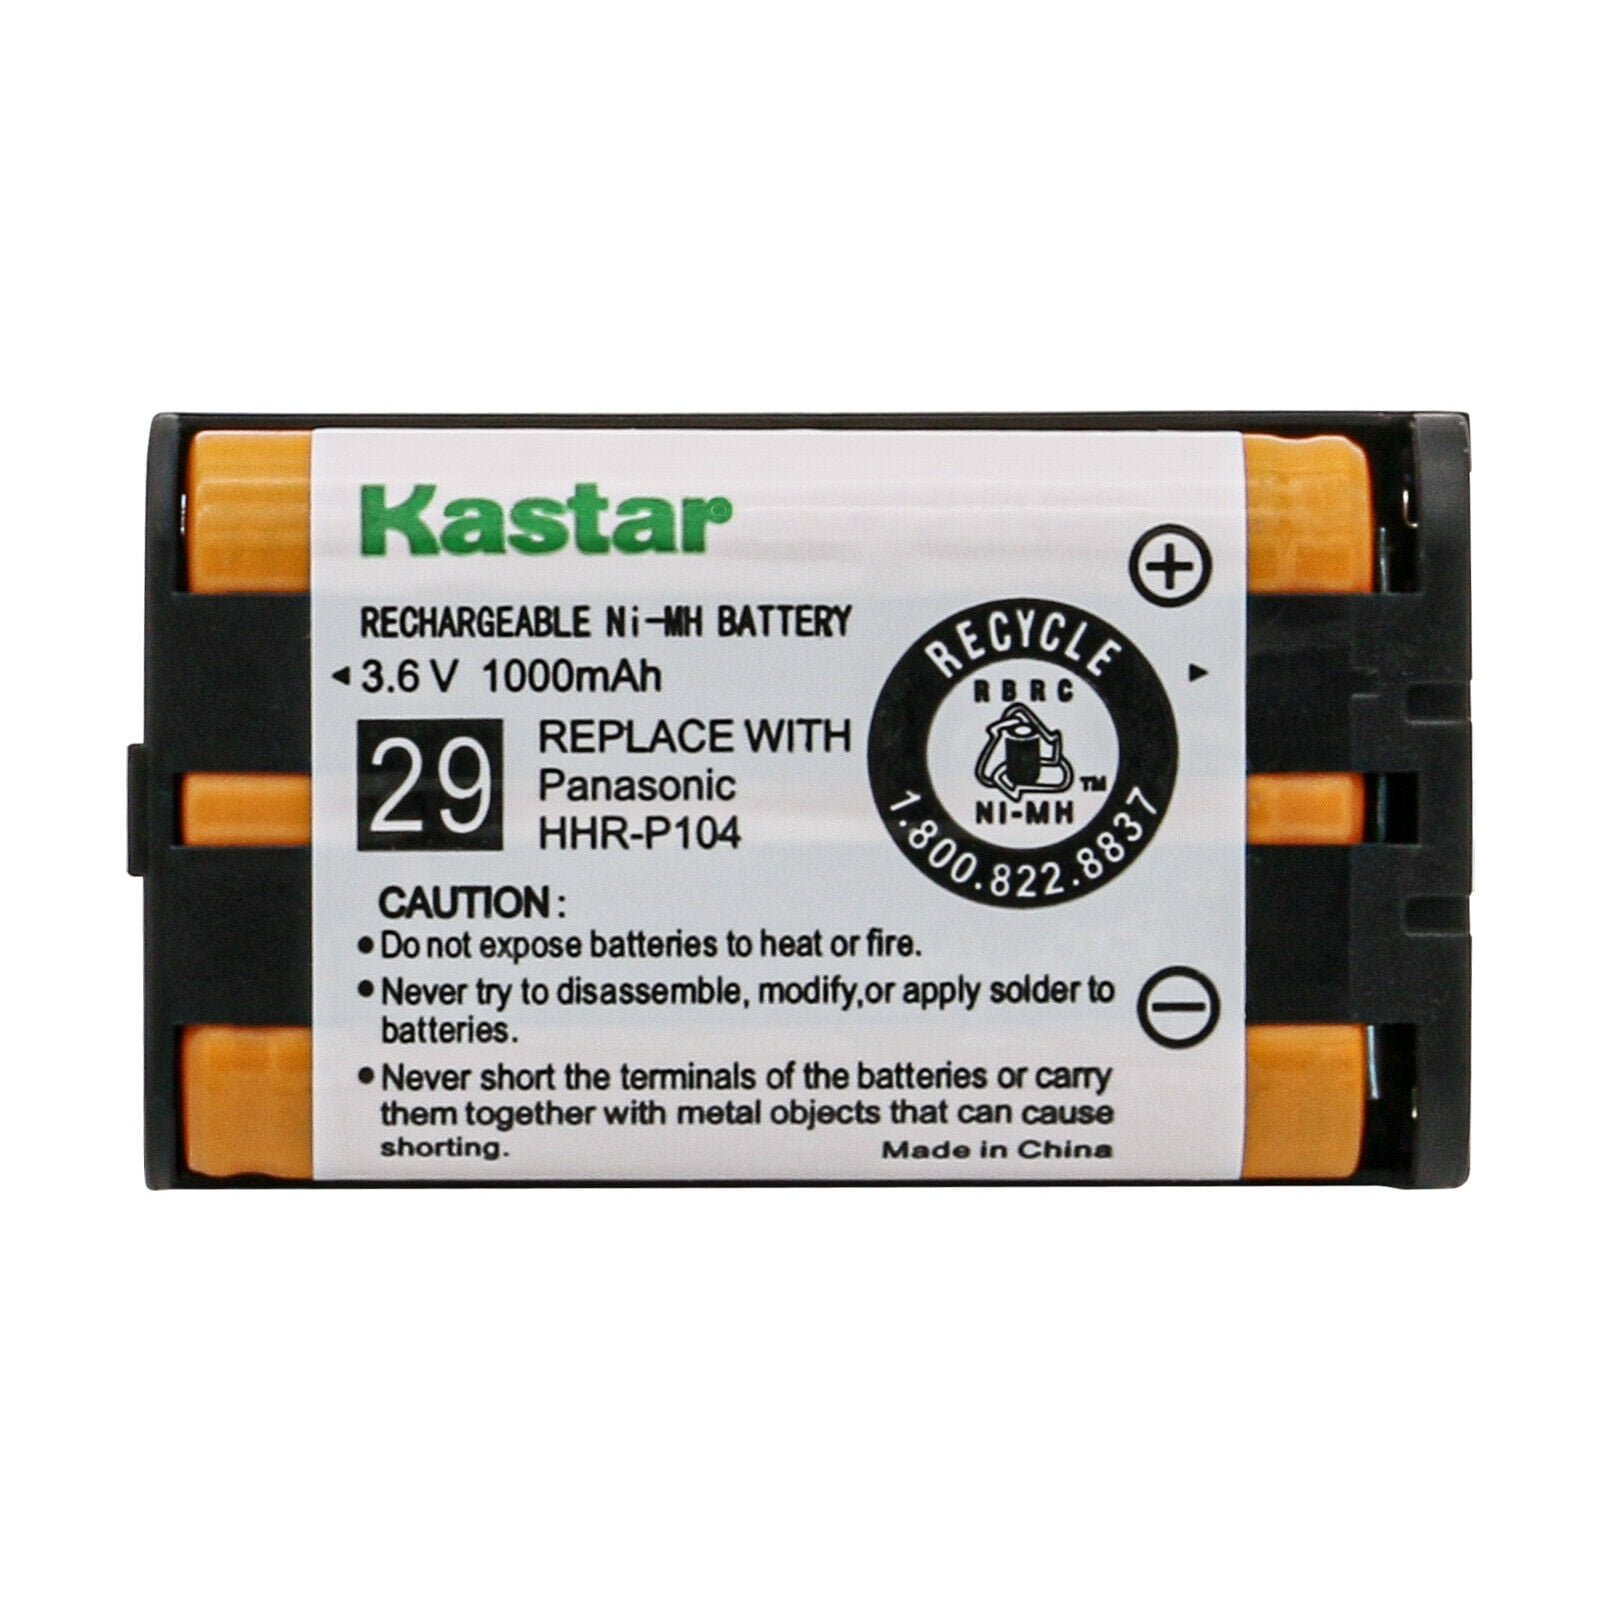 Kastar 2 Pack Ni-MH Battery Compatible with JVC BN-V11U BN-V12U BN-V14U BN-V22U BN-V25U Panasonic HHR-V20A/1B HHR-V40A/1B PV-BP15 PV-BP17 VW-VBS1 VW-VBS2 AKKUVZ8240 